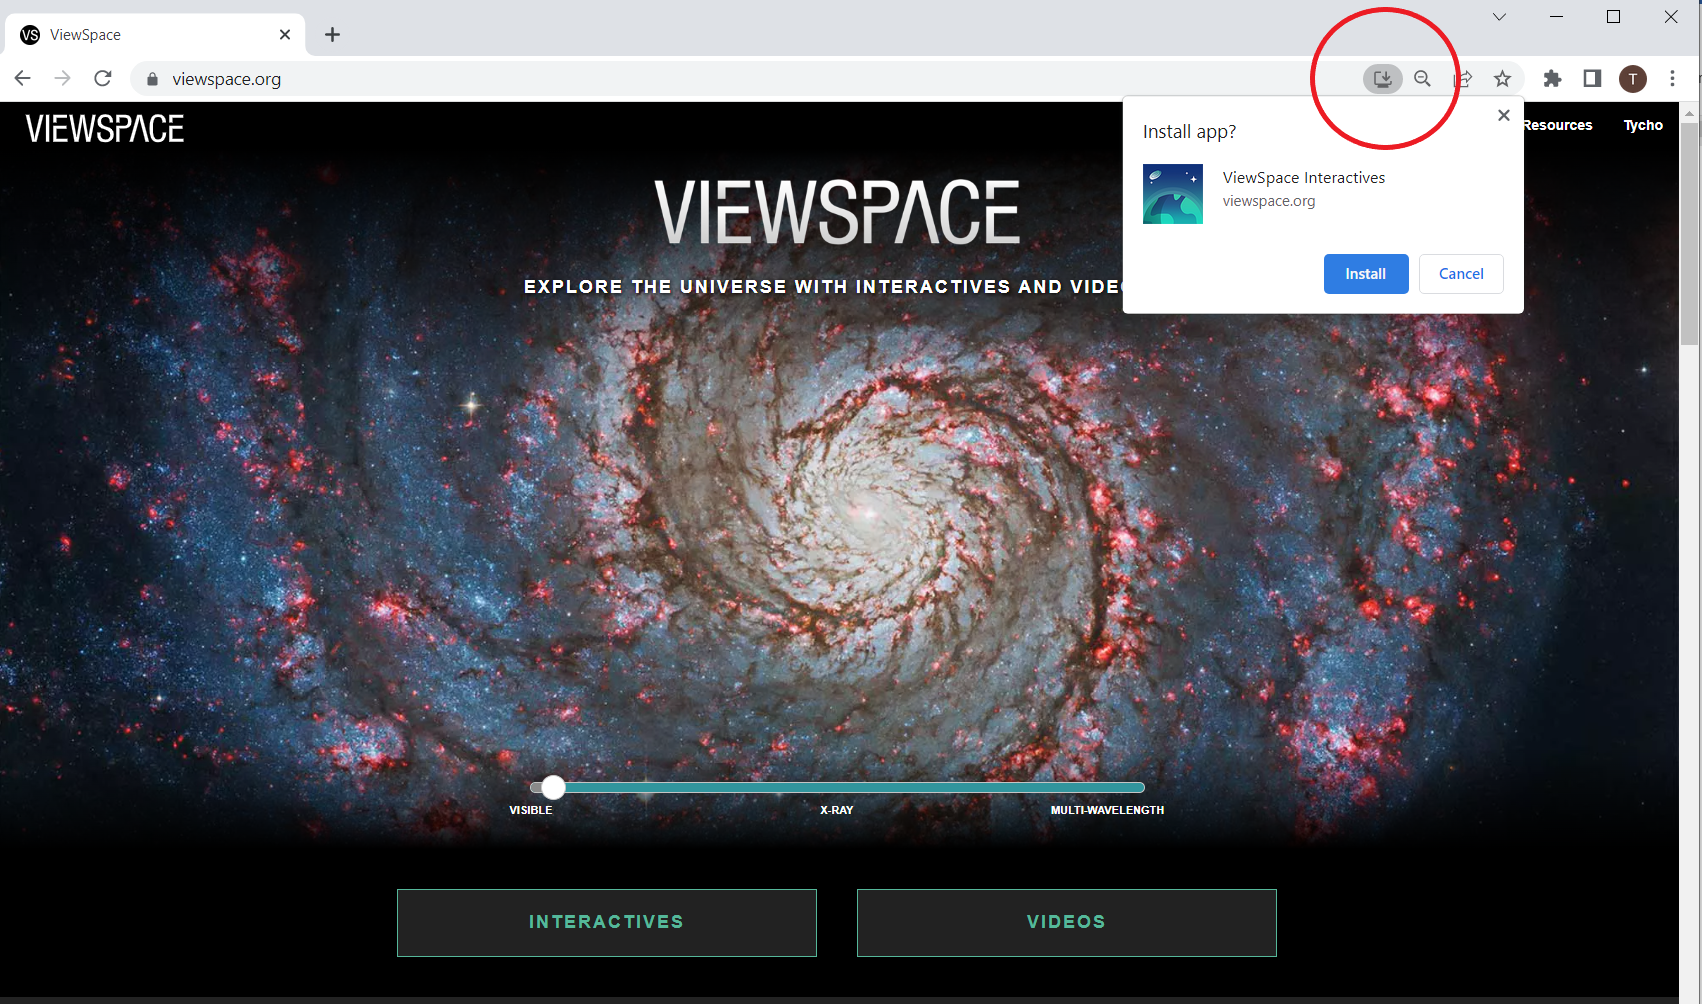 Screenshot of the ViewSpace home screen on Google Chrome. On the browser bar at the top right, a download icon is circled. Below the icon is a popup with the words Install app? ViewSpace Interactives. In the bottom right is a highlighted button labeled Install.